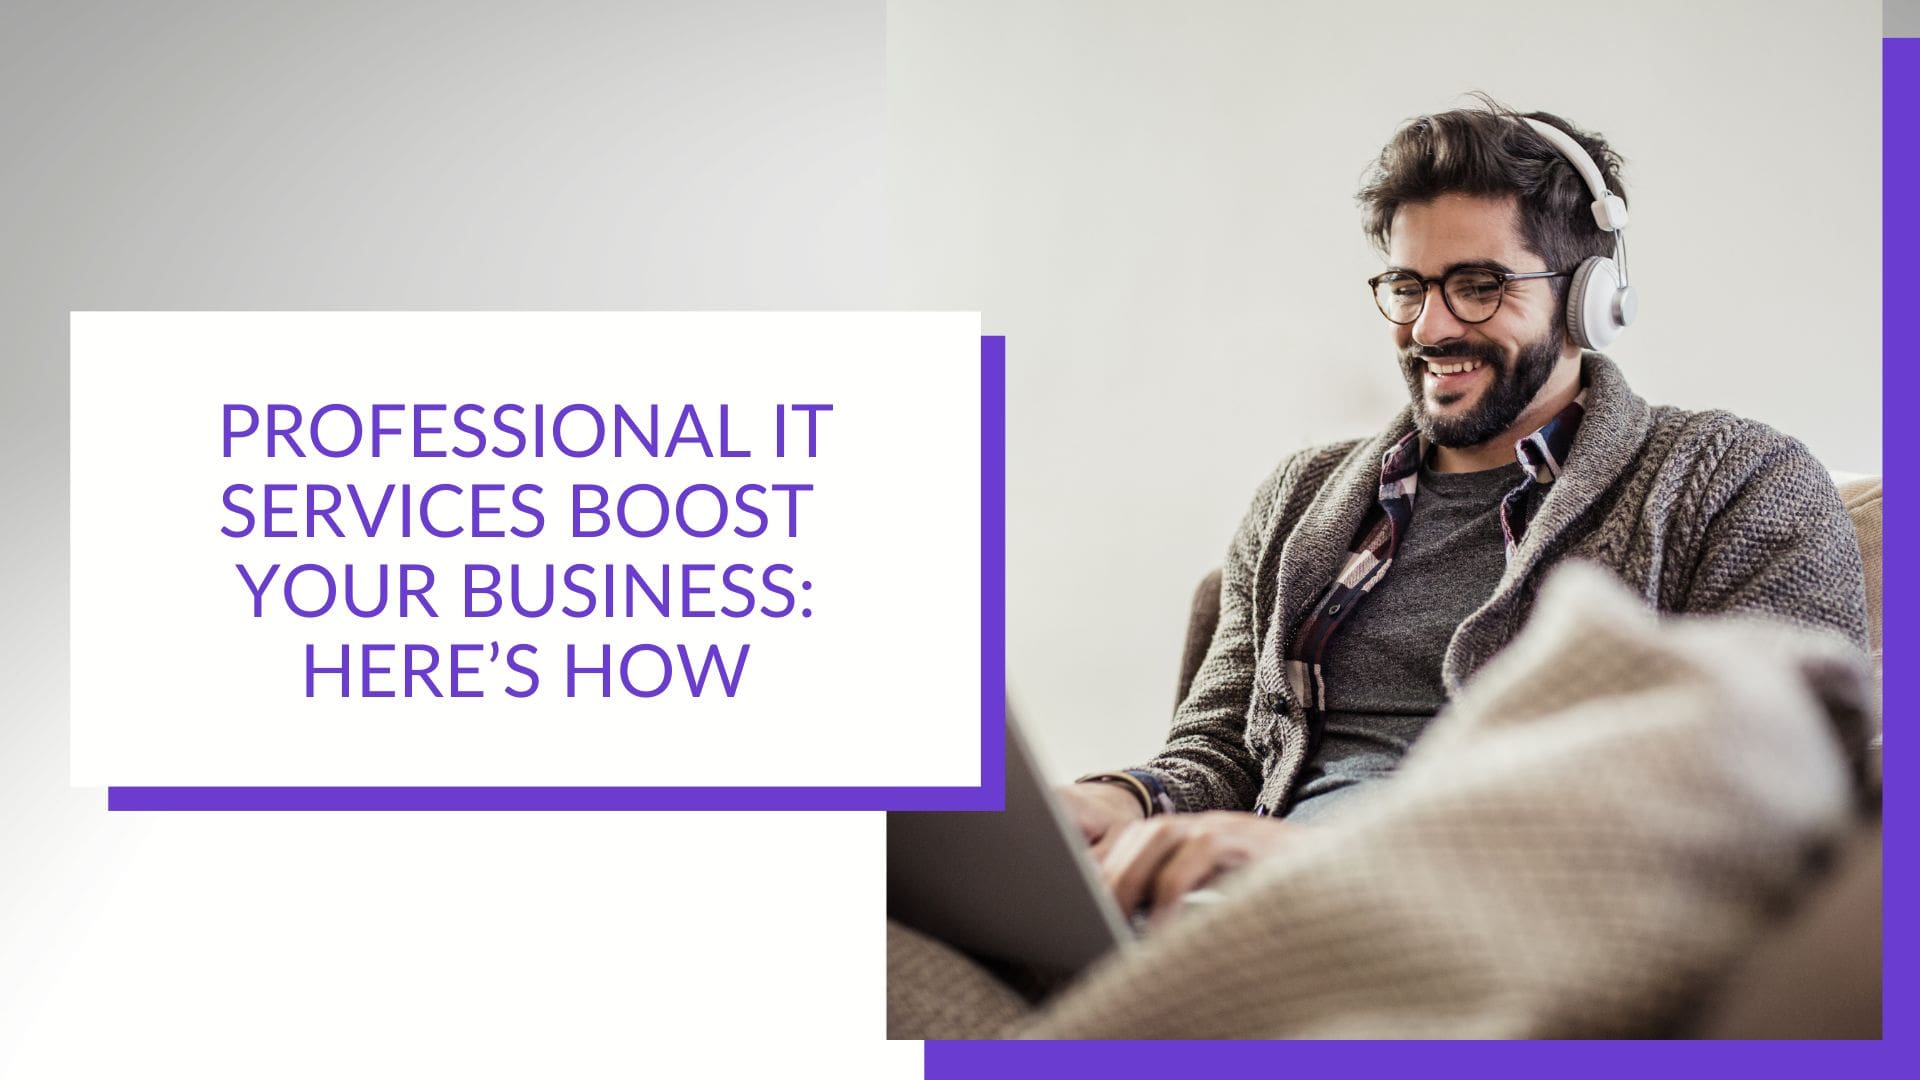 Using Professional IT Services to Boost Your Business - Aeko